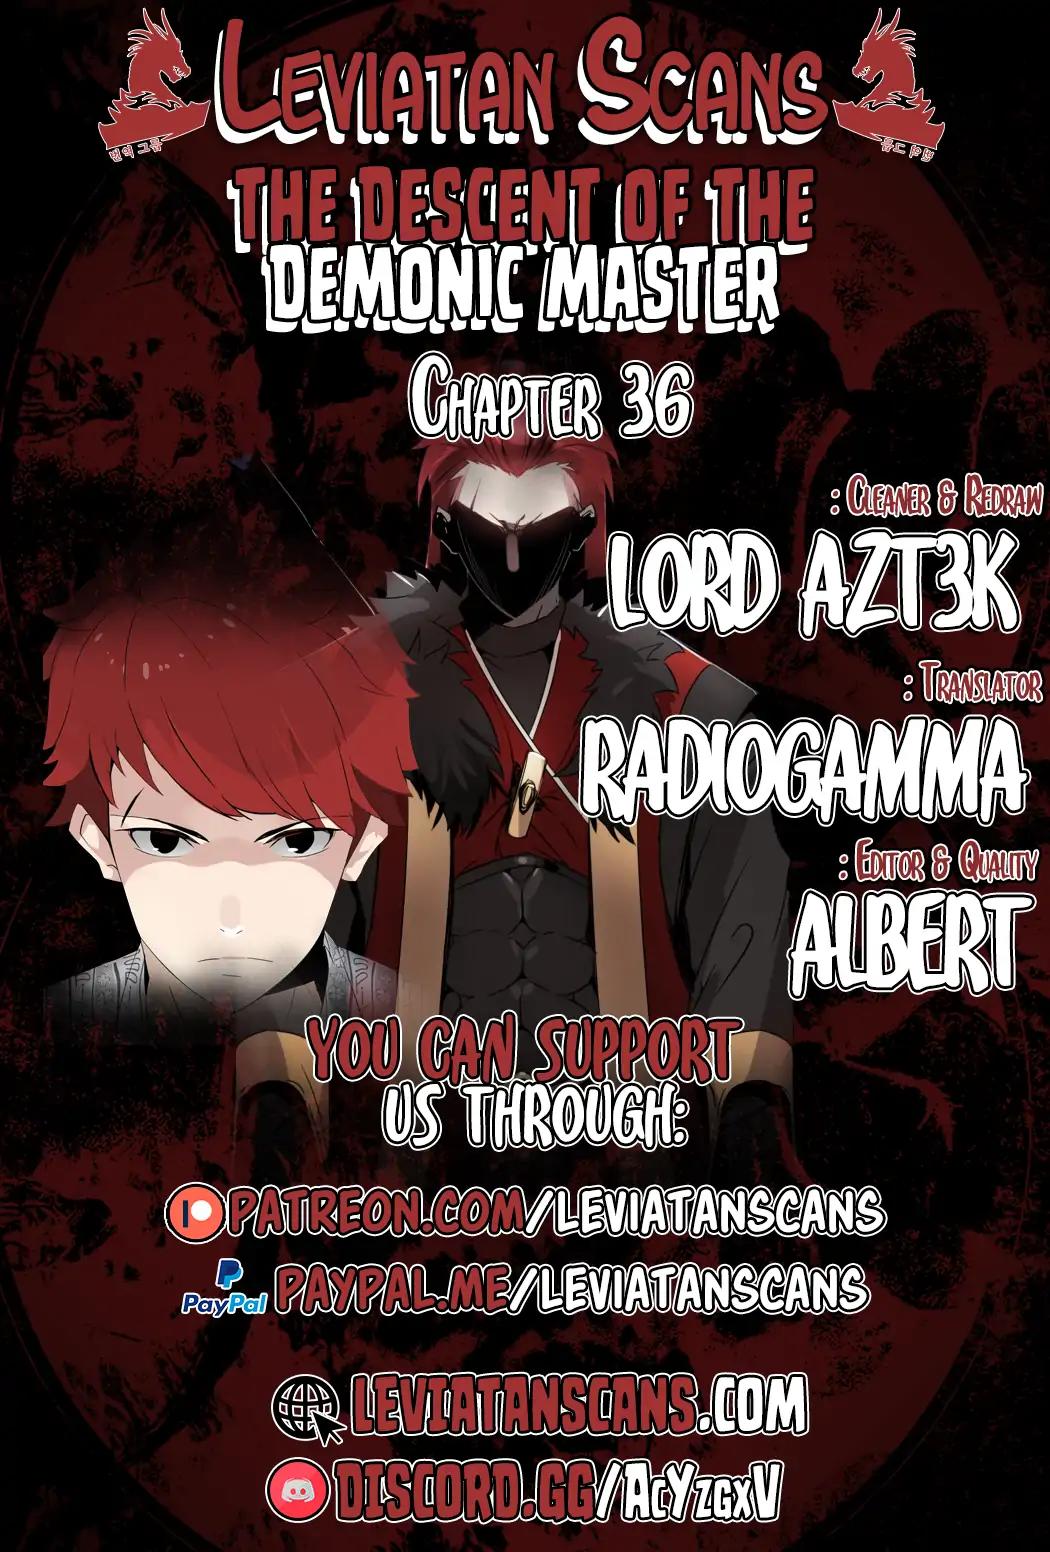 The Descent of the Demonic Master Chapter 36